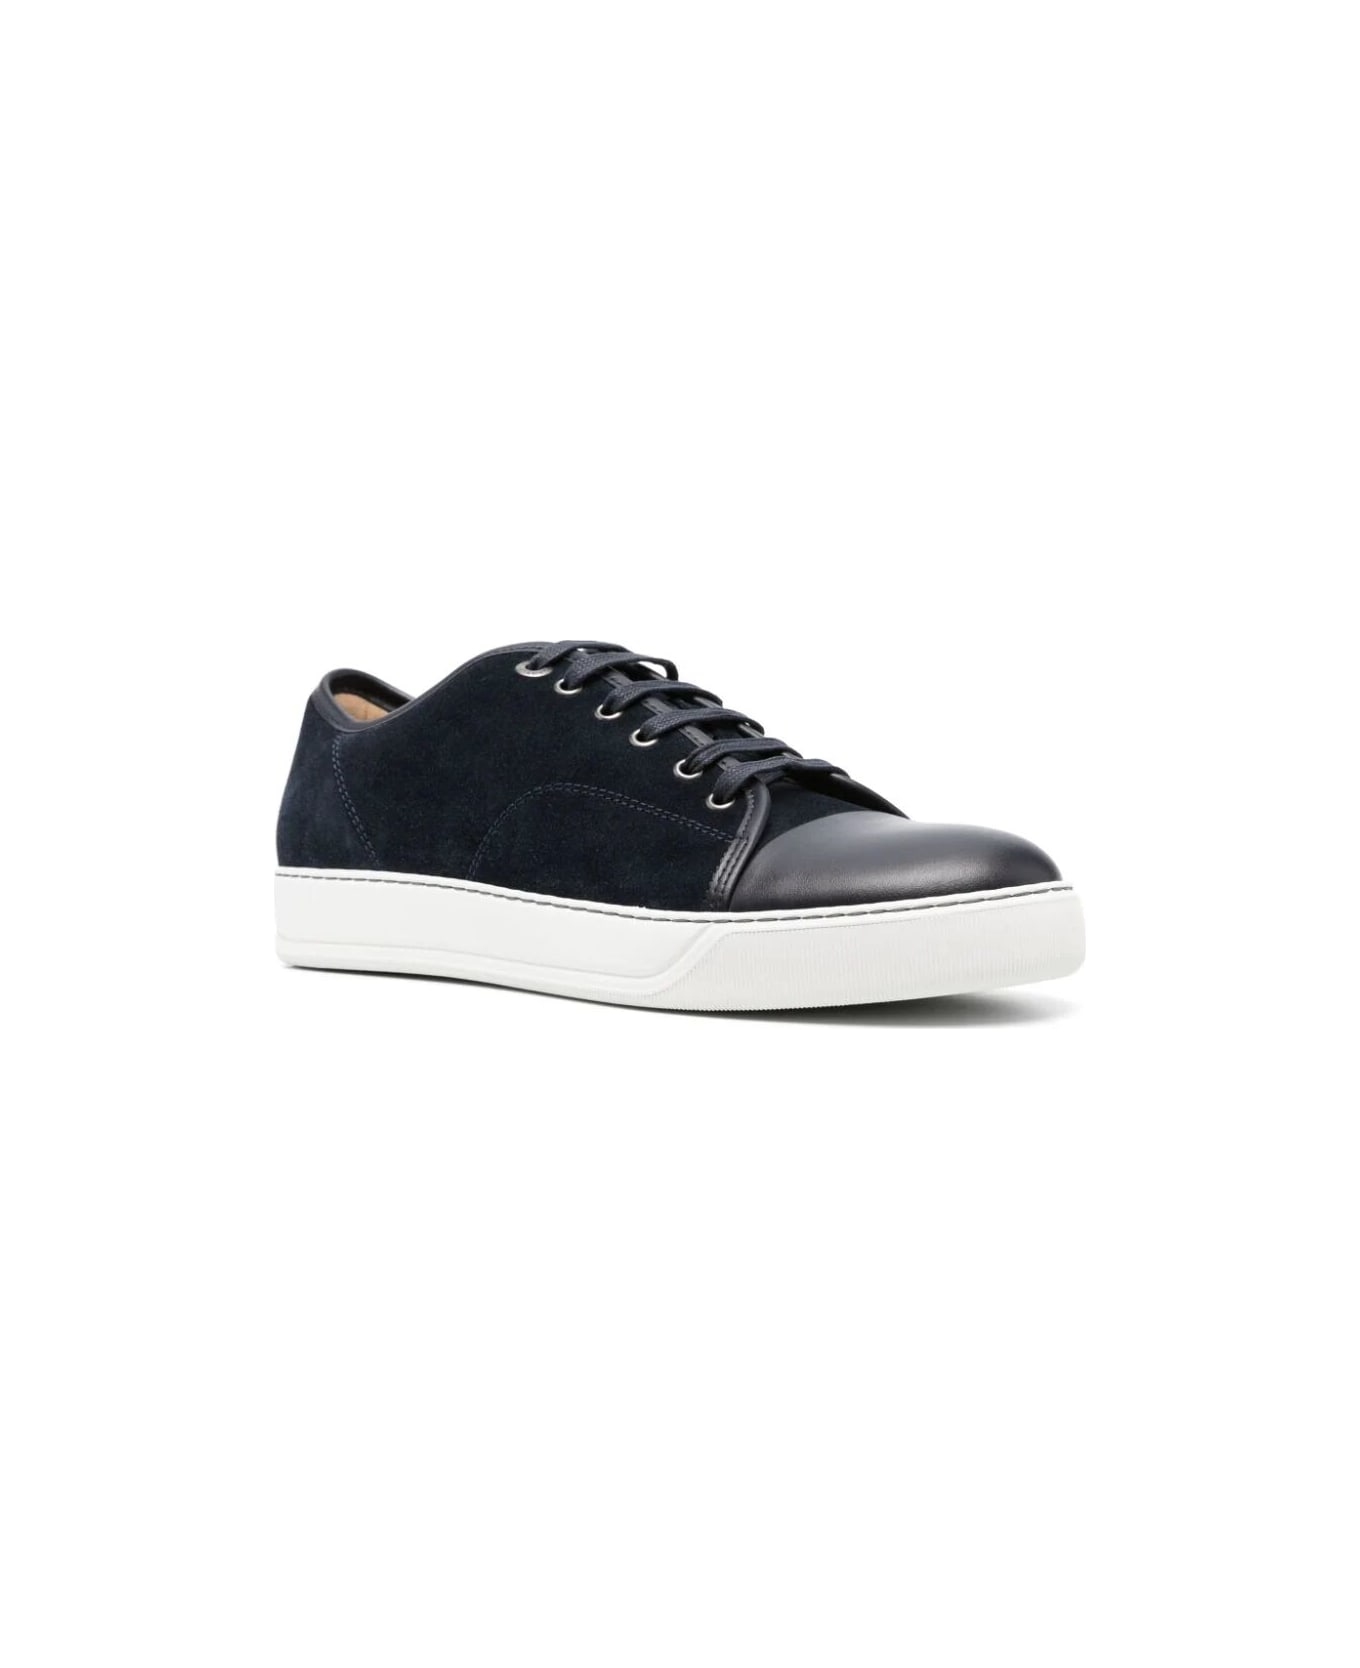 Lanvin Suede And Nappa Captoe Low To Sneaker - Navy Blue スニーカー